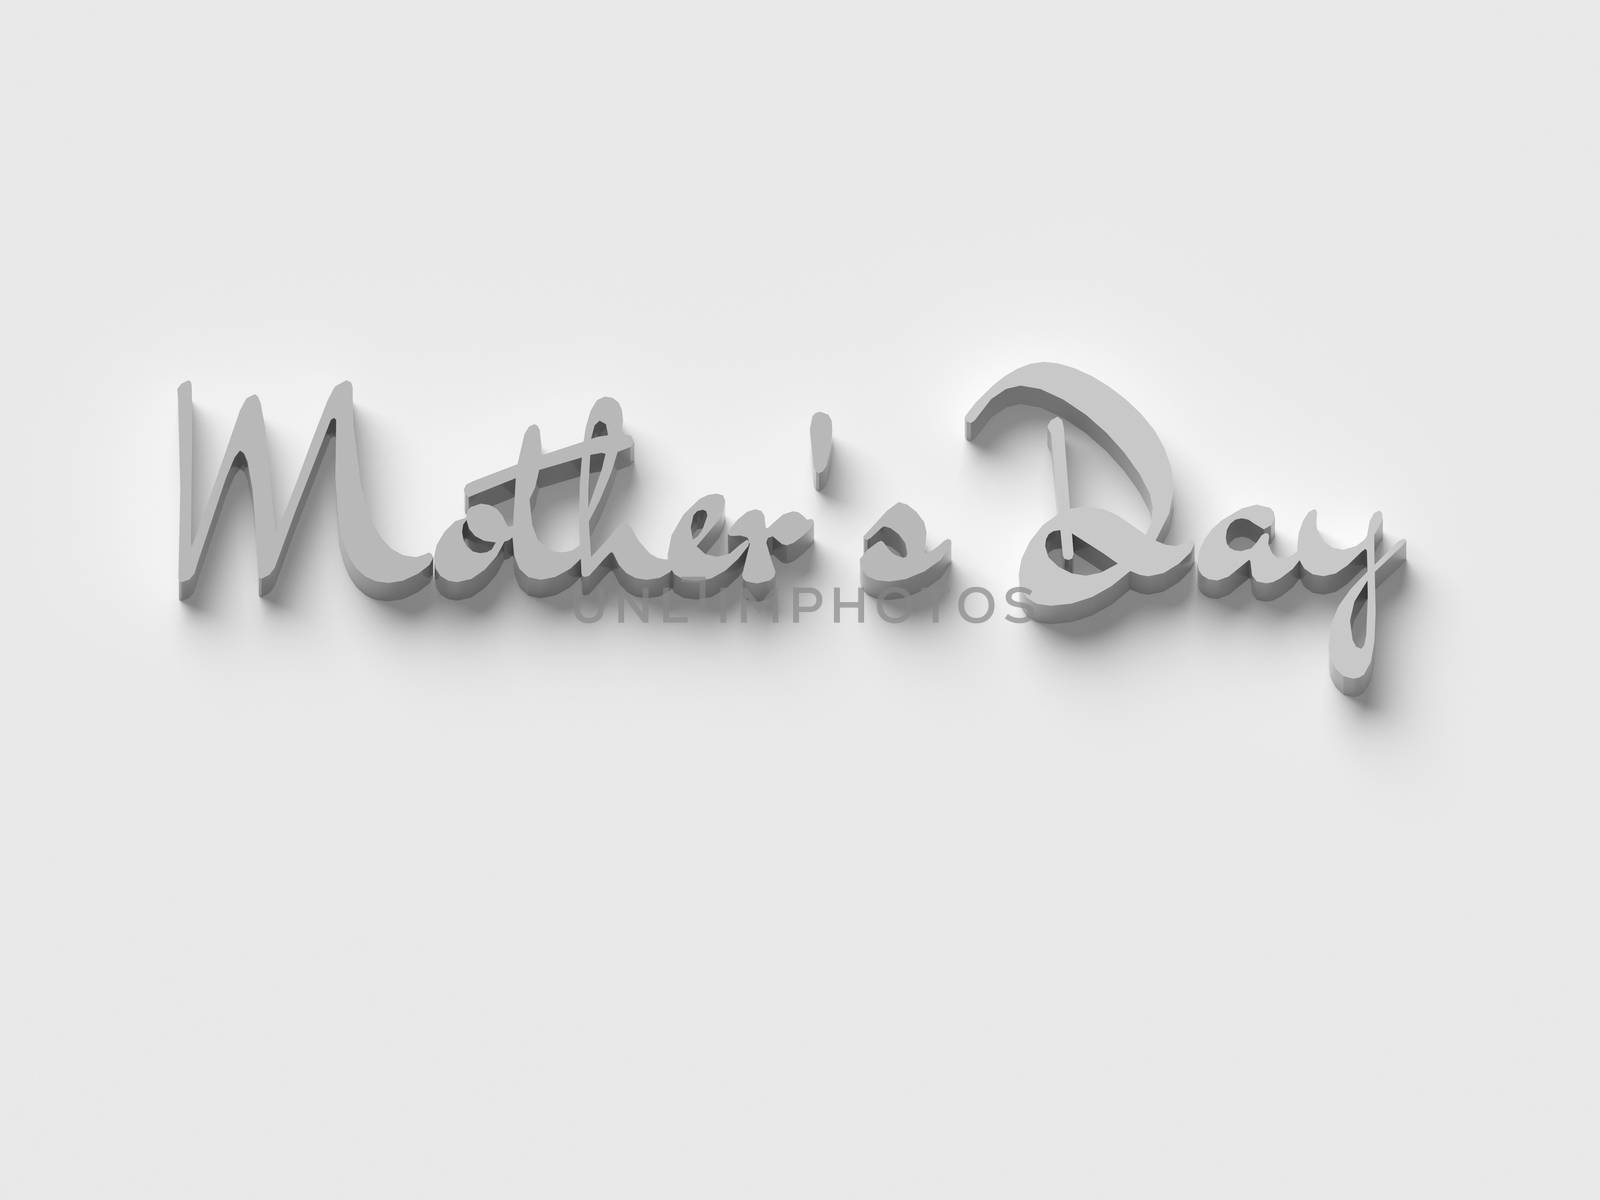 BLACK AND WHITE PHOTO OF 3D WORDS 'MOTHER'S DAY' ON PLAIN BACKGROUND